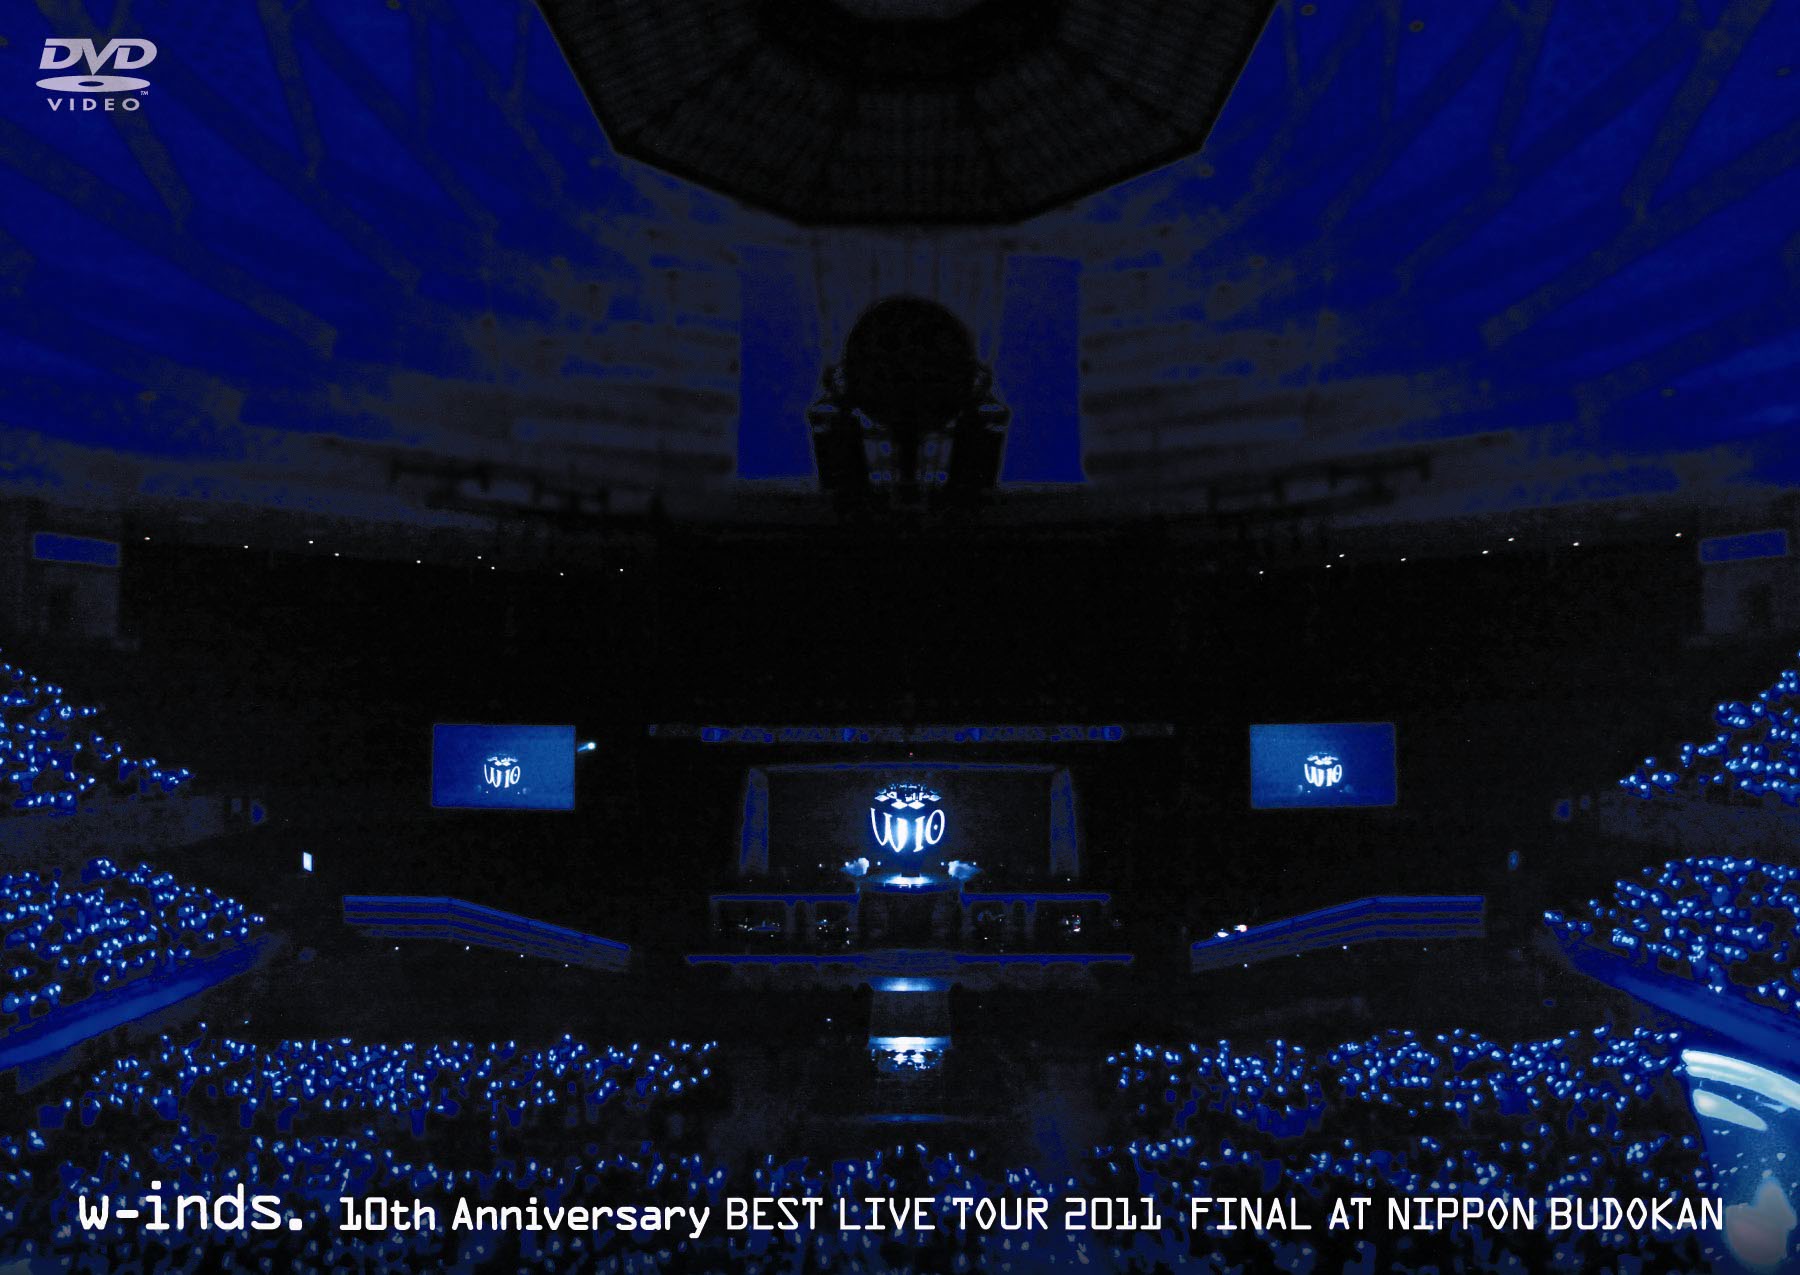 w-inds. 10th Anniversary BEST LIVE TOUR 2011 FINAL at 日本武道館